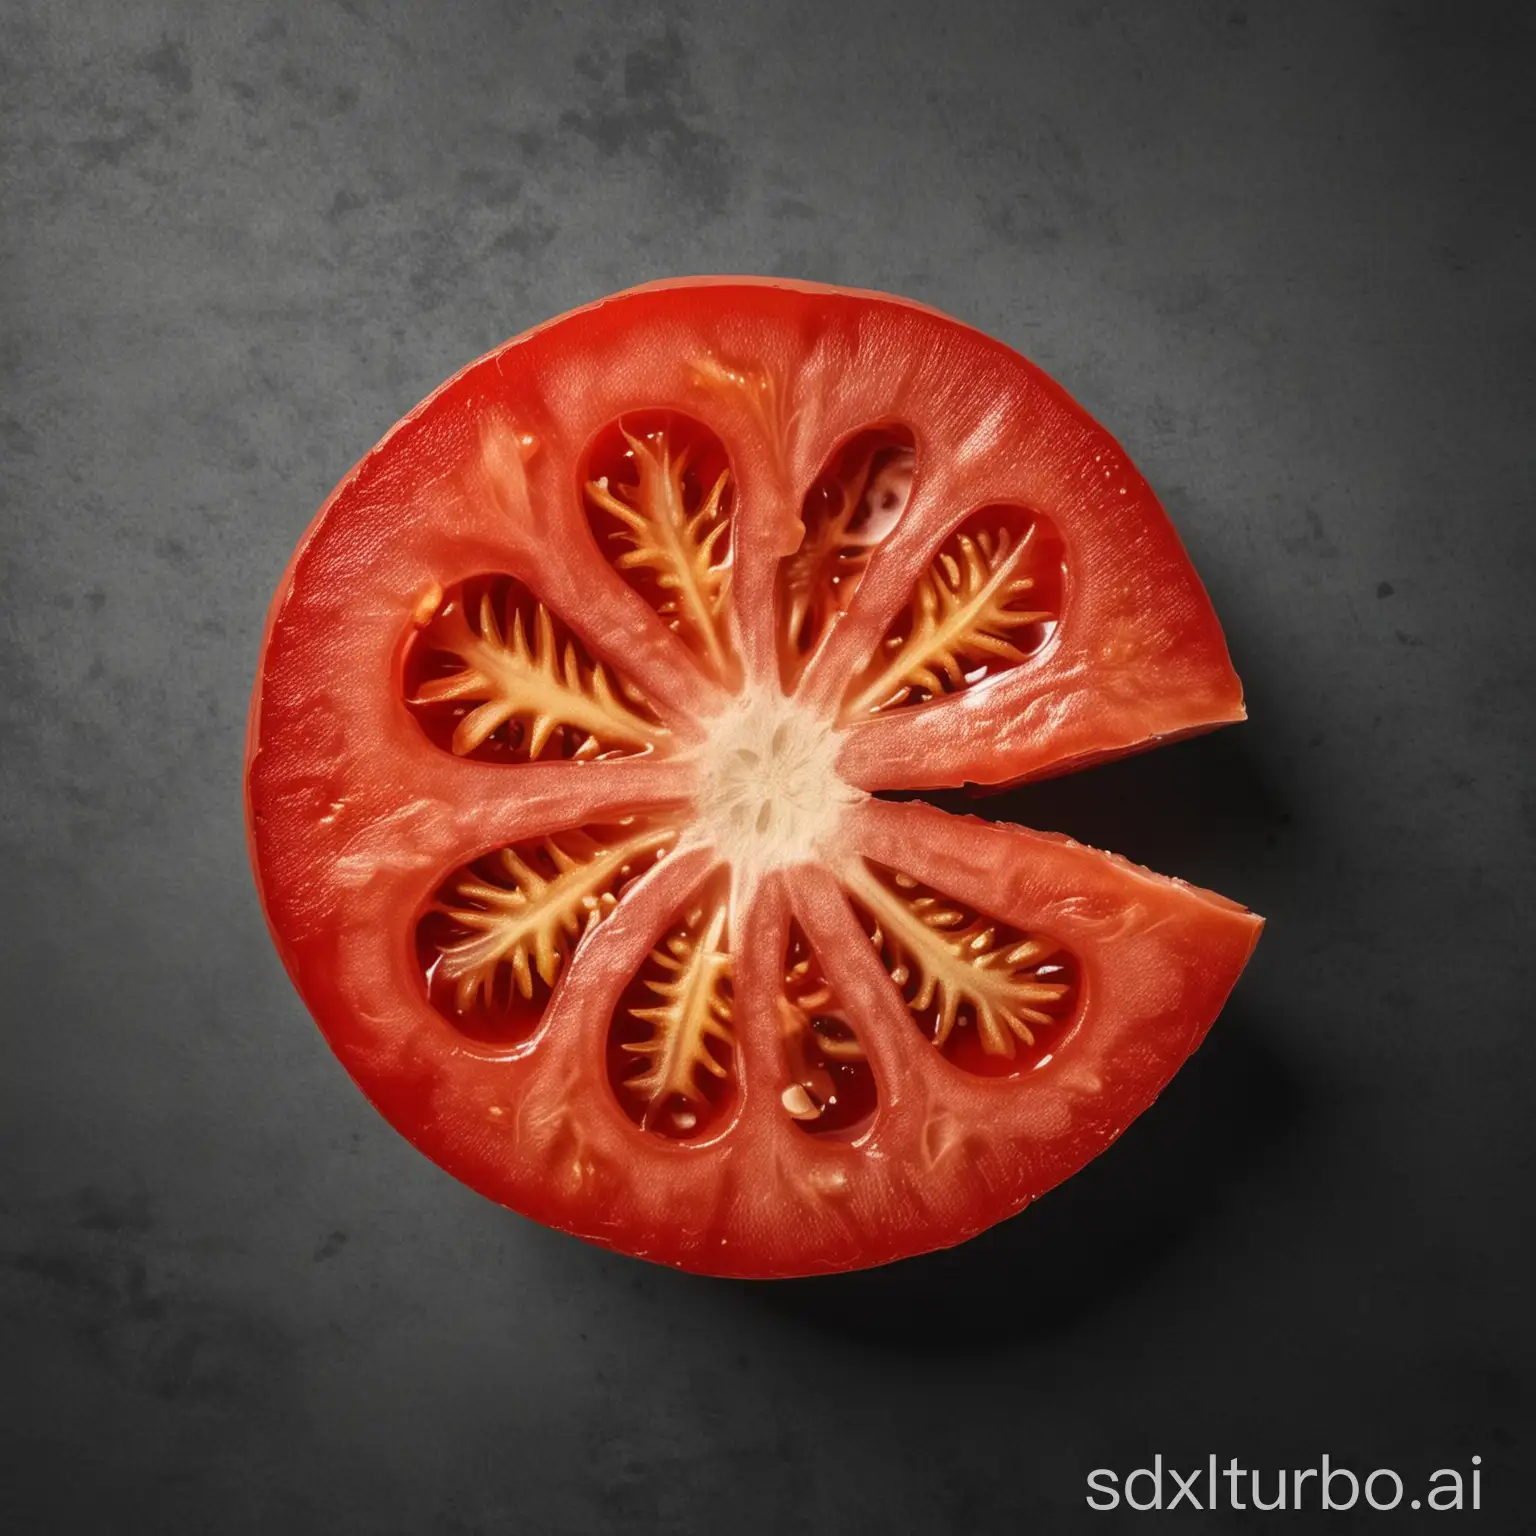 photorealistic slice of tomato, product shot from above